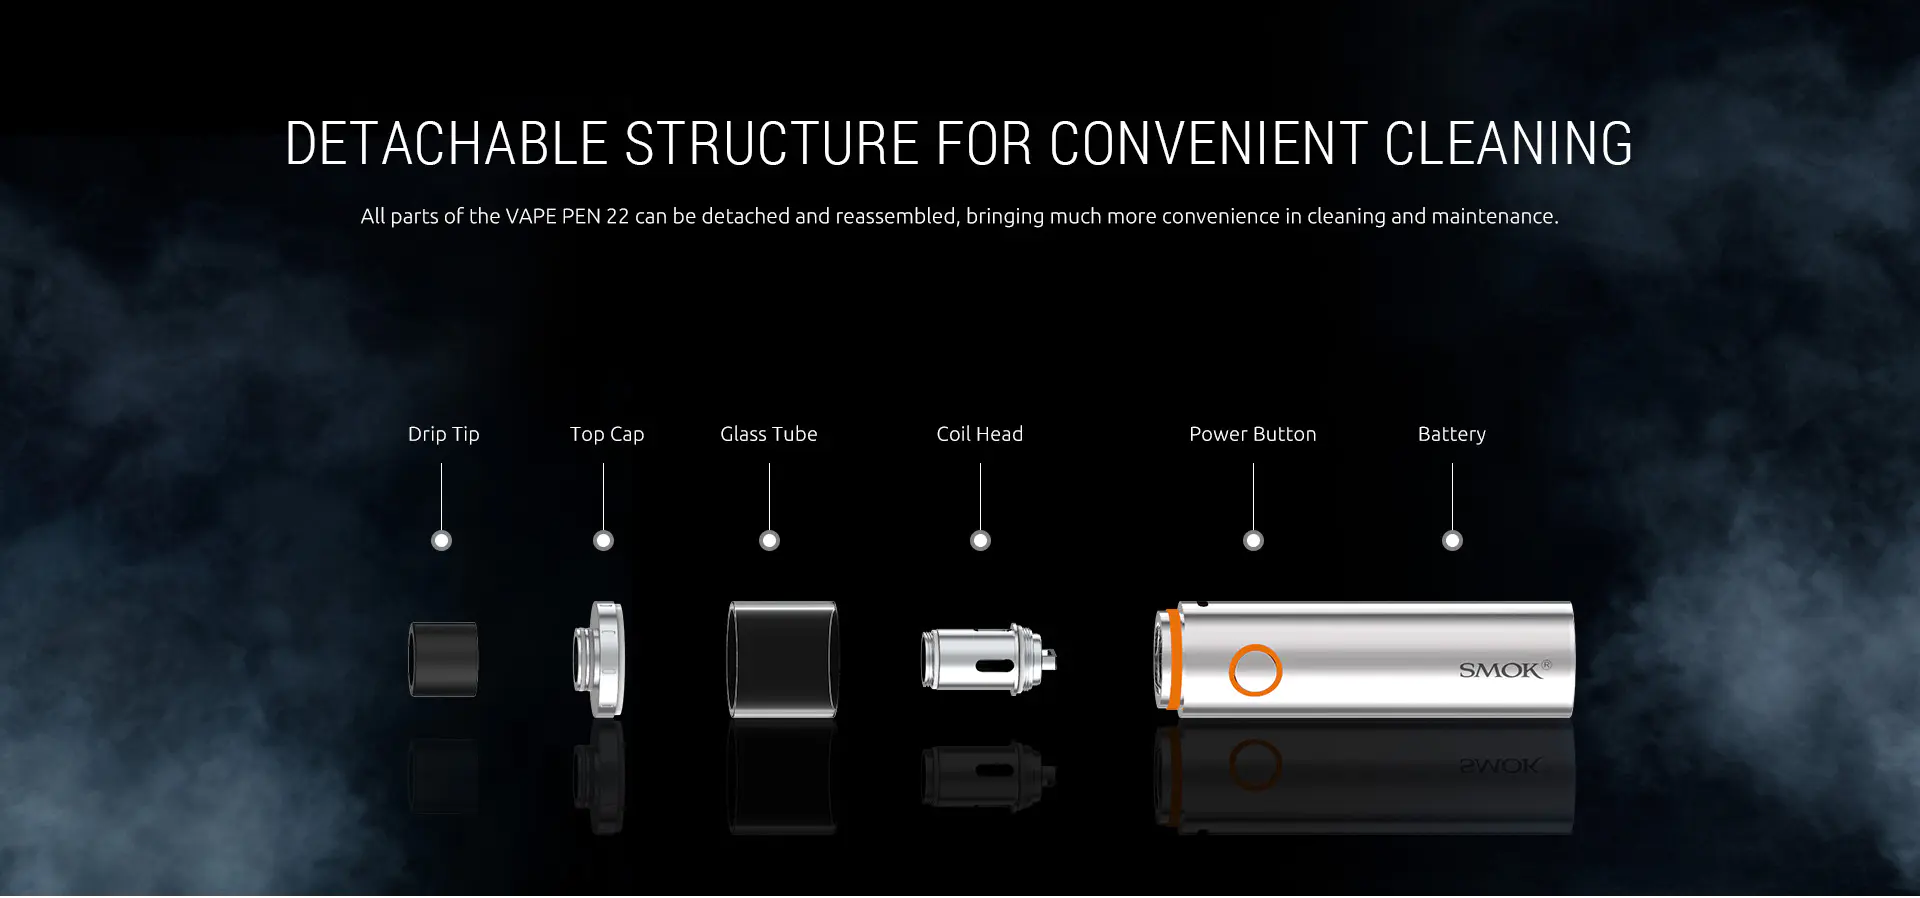 The Detachable Structure of SMOK Vape Pen 22 Kit for Convenient Cleaning